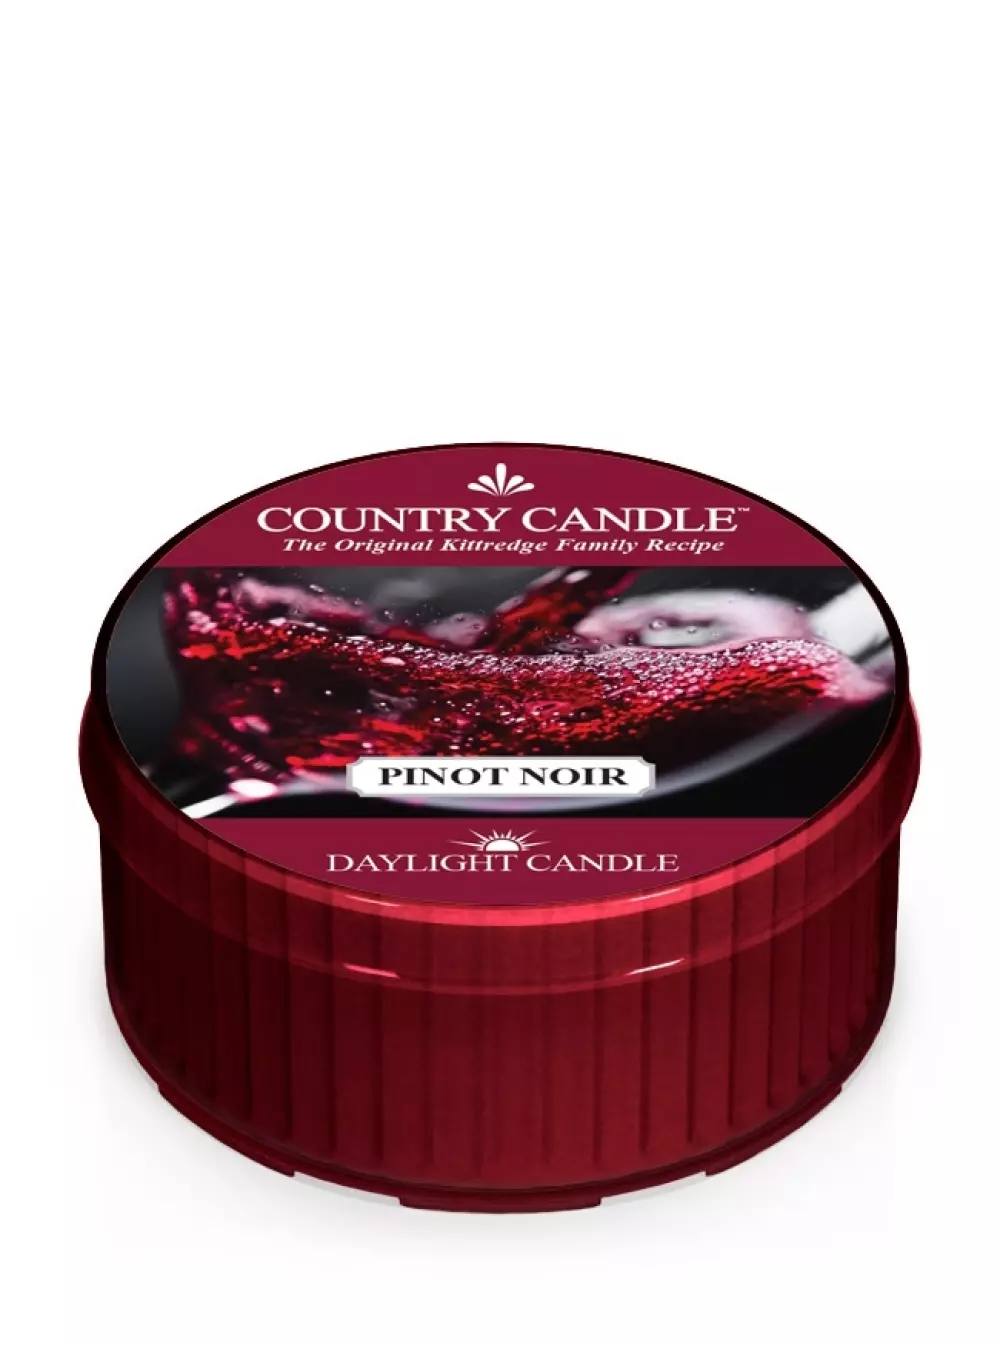 Country Candle Daylight Pinot Noir, 0846853055848, CC-0092-010481, Interiør, Duft, Country Candle, House of Månsson